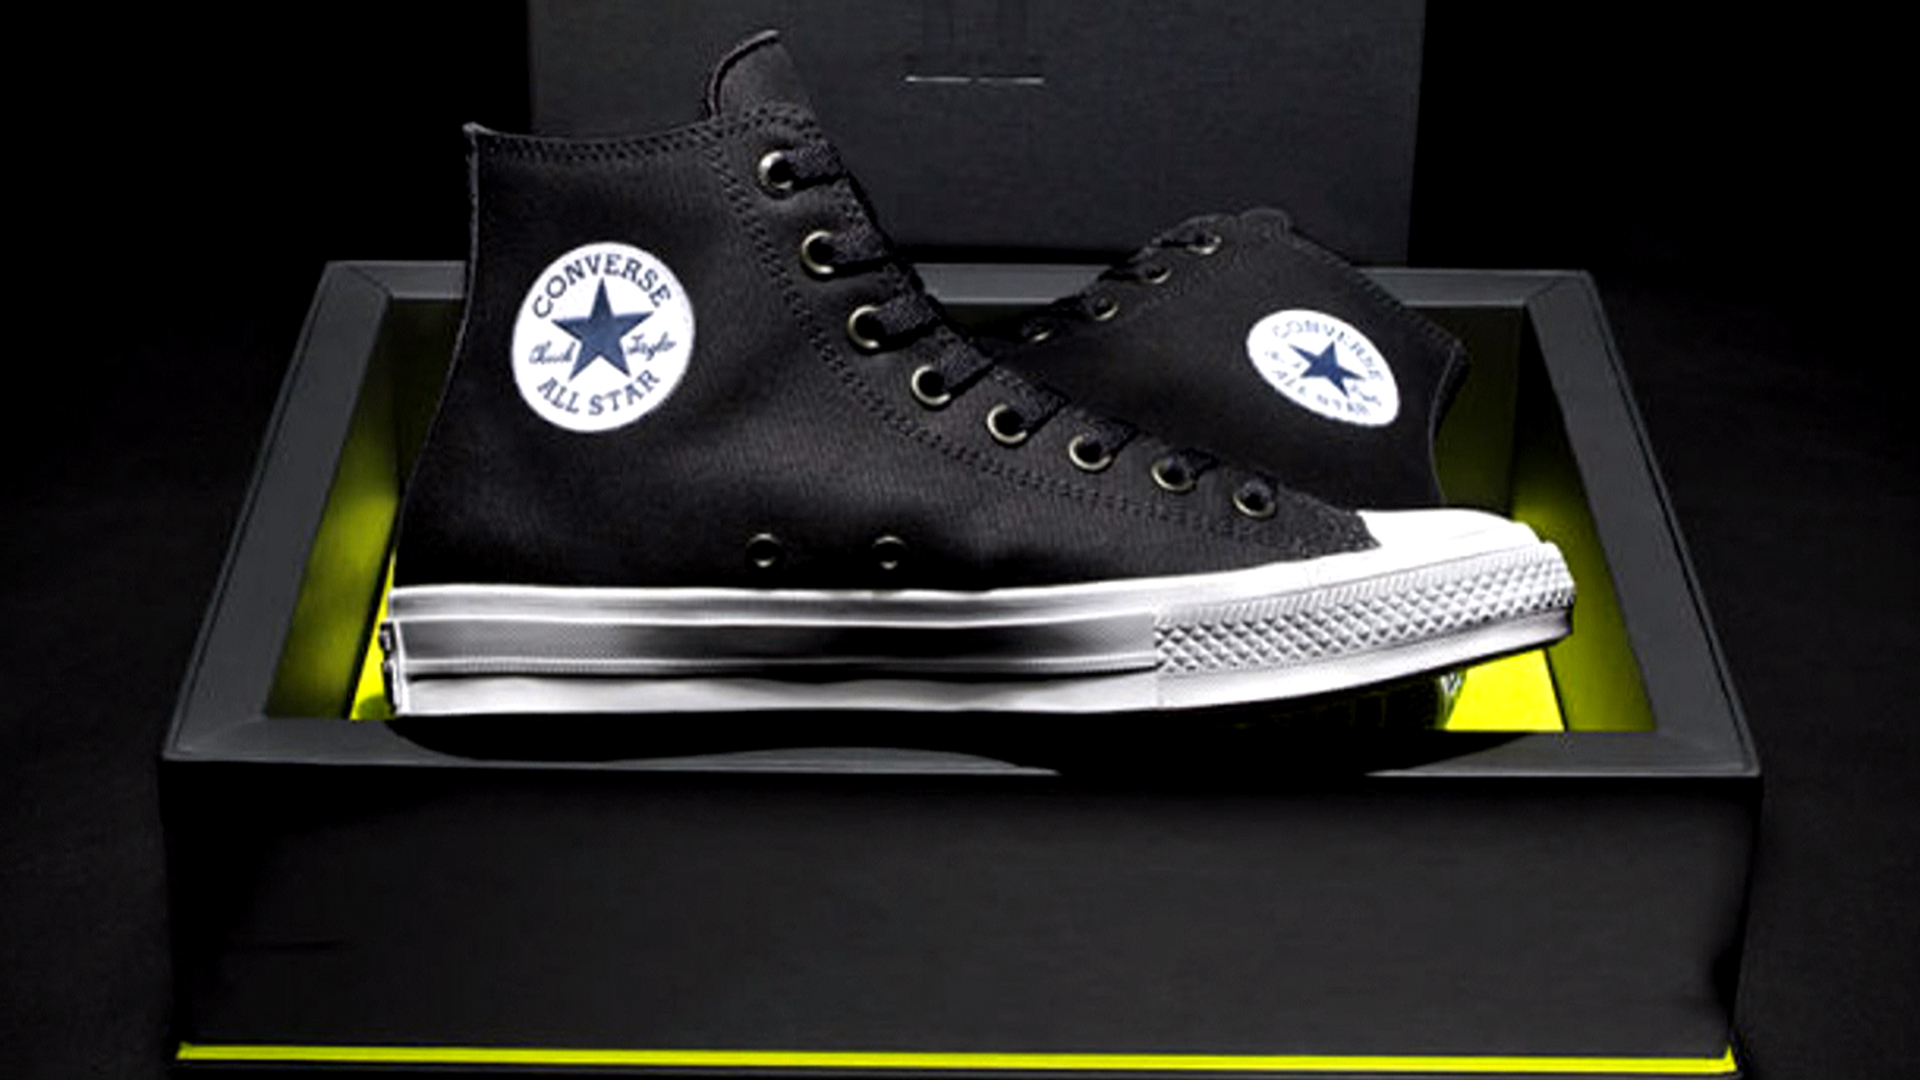 Converse unveils the Chuck Taylor II, a 